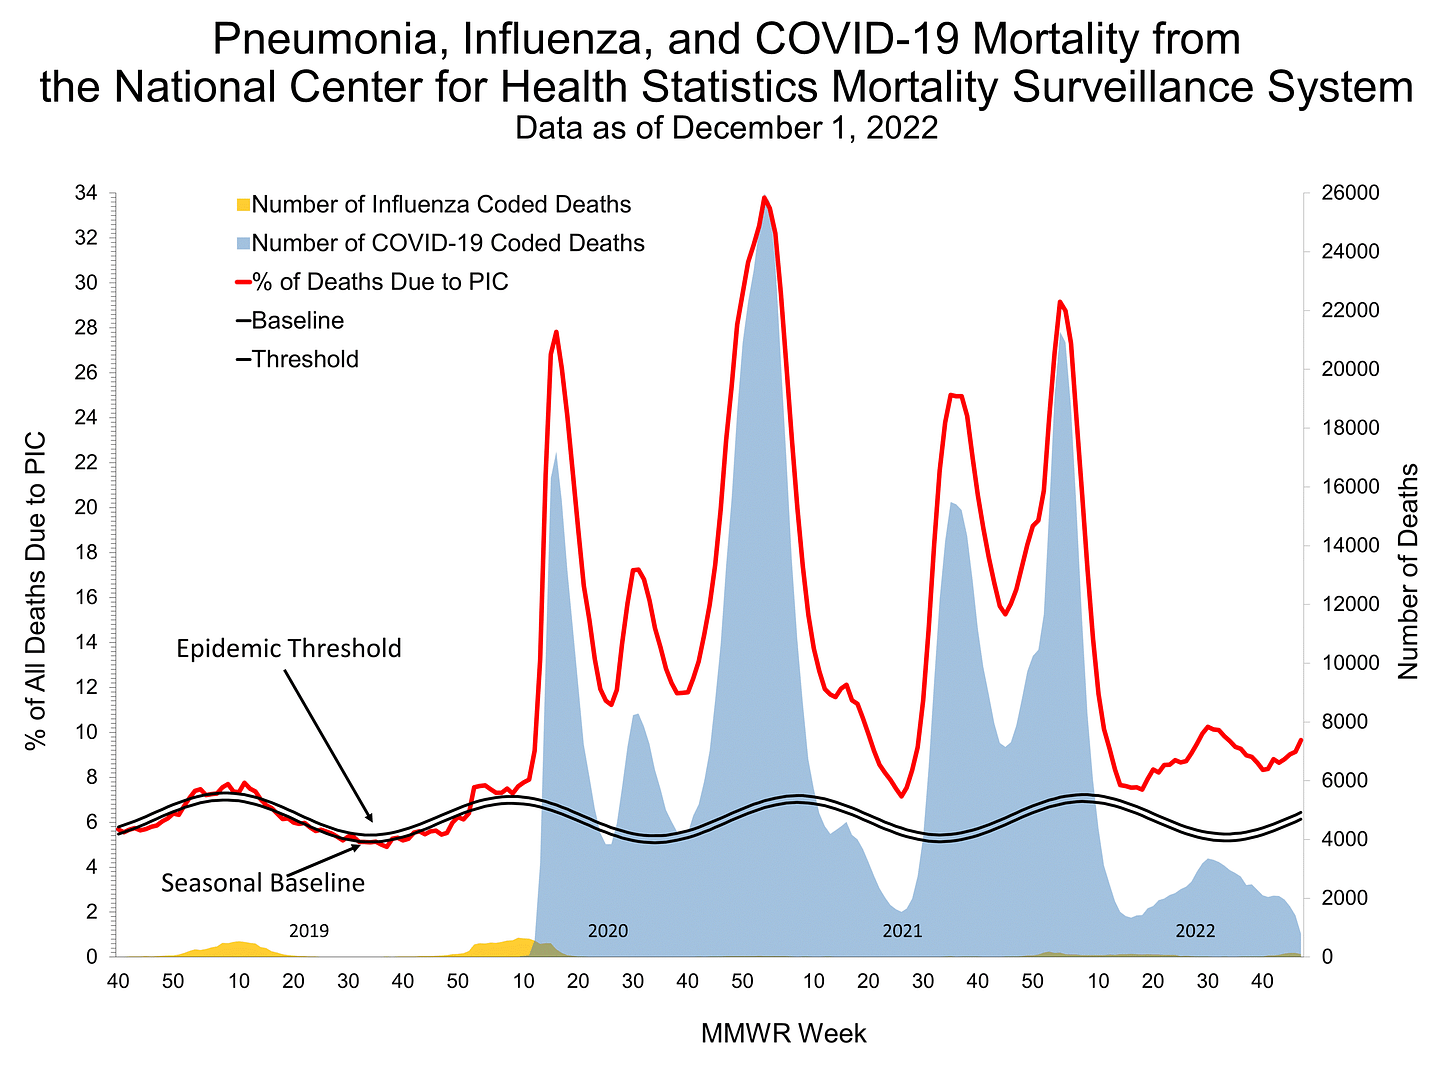 Title reads “Pneumonia, Influenza, and COVID-19 Mortality from the National Center for Health Statistics Mortality Surveillance System. Data as of 12/1/22.” Graph has y-axis on left (% of All Deaths due to PIC with 0 to 34) and right (Number of Deaths with 0 to 26,000) and x-axis labeled as MMWR Week with 10 to 50 and years 2019 to 2022. Legend at top left shows number of Influenza coded deaths (yellow), number of COVID-19 coded deaths (blue), % of deaths due to PIC (red), baseline (black), and threshold (black). Two black lines fluctuate between 5 and 7% as seasonal baseline and epidemic threshold. Red line initially follows two black lines during 2019, increases with large peaks in early 2020 to early 2022, drops then plateaus above epidemic threshold with an increase, drop and recent increase. Yellow curve reaches 1% and 500 deaths in 2019 and early 2020. Blue curve begins in early 2020, follows the same red line peaks until week 15 of 2022 where it is below epidemic threshold line.